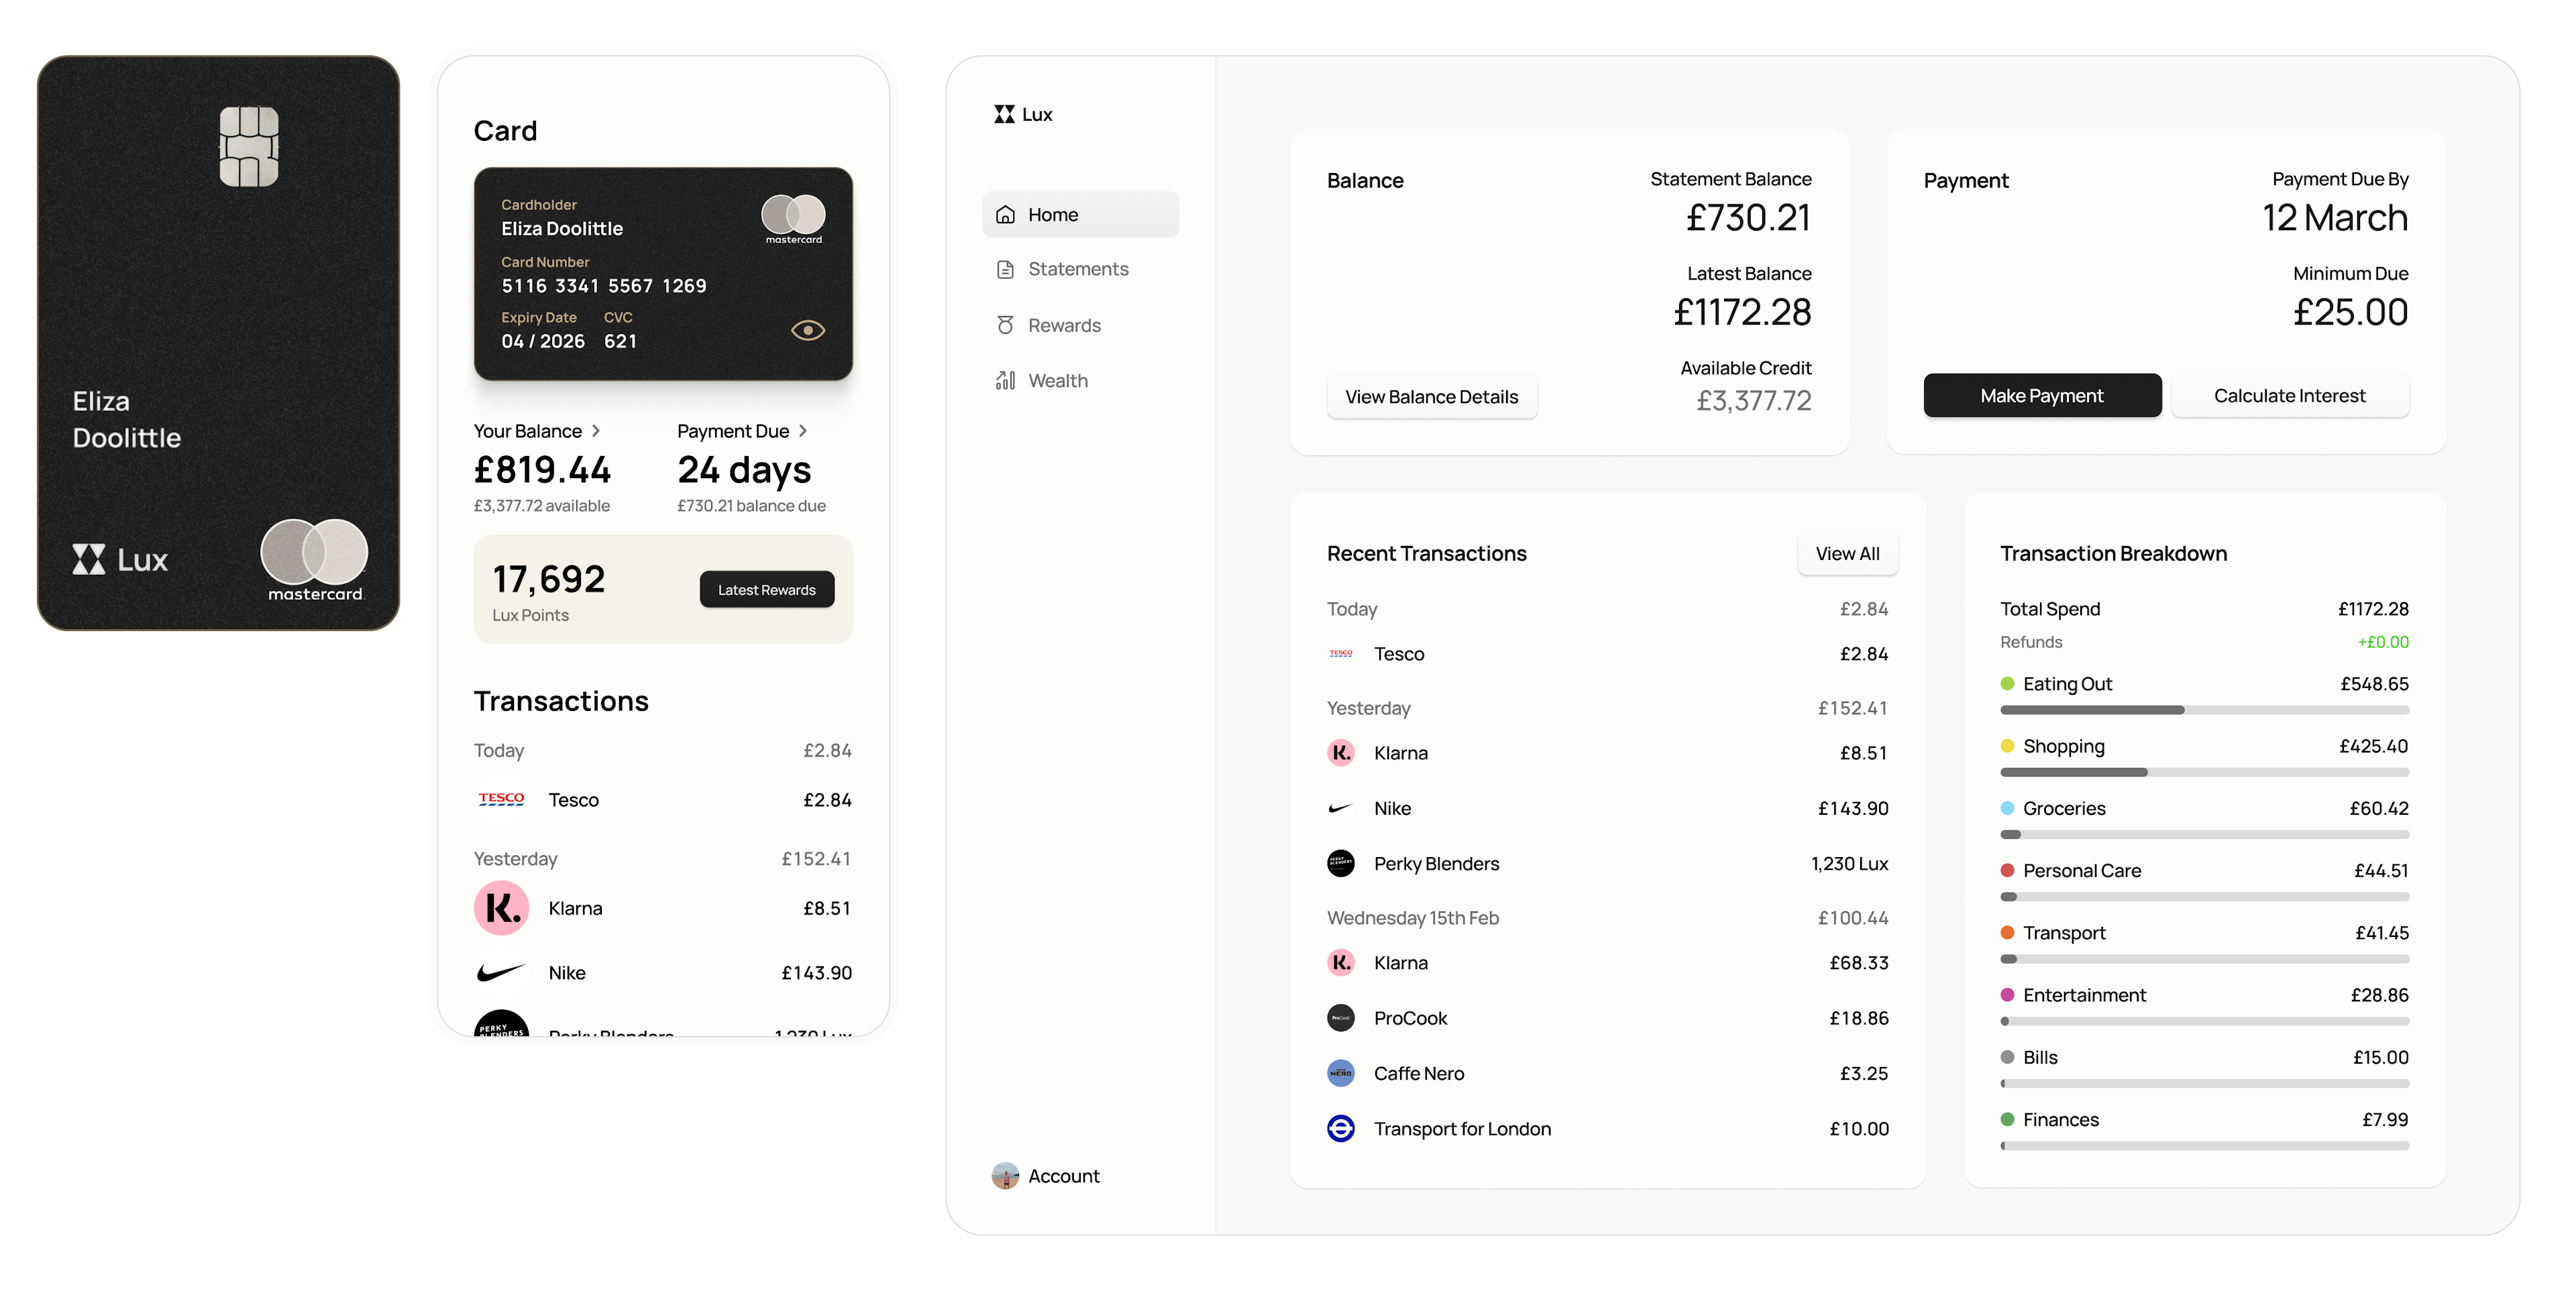 A product demo, showing the Lux credit card, the home screen of the phone app and the web app home page. The top half of the phone screen shows the card and its details such as the card number. You can see your credit card balance as well as when the payment is due, with a scrollable list of all your transactions.